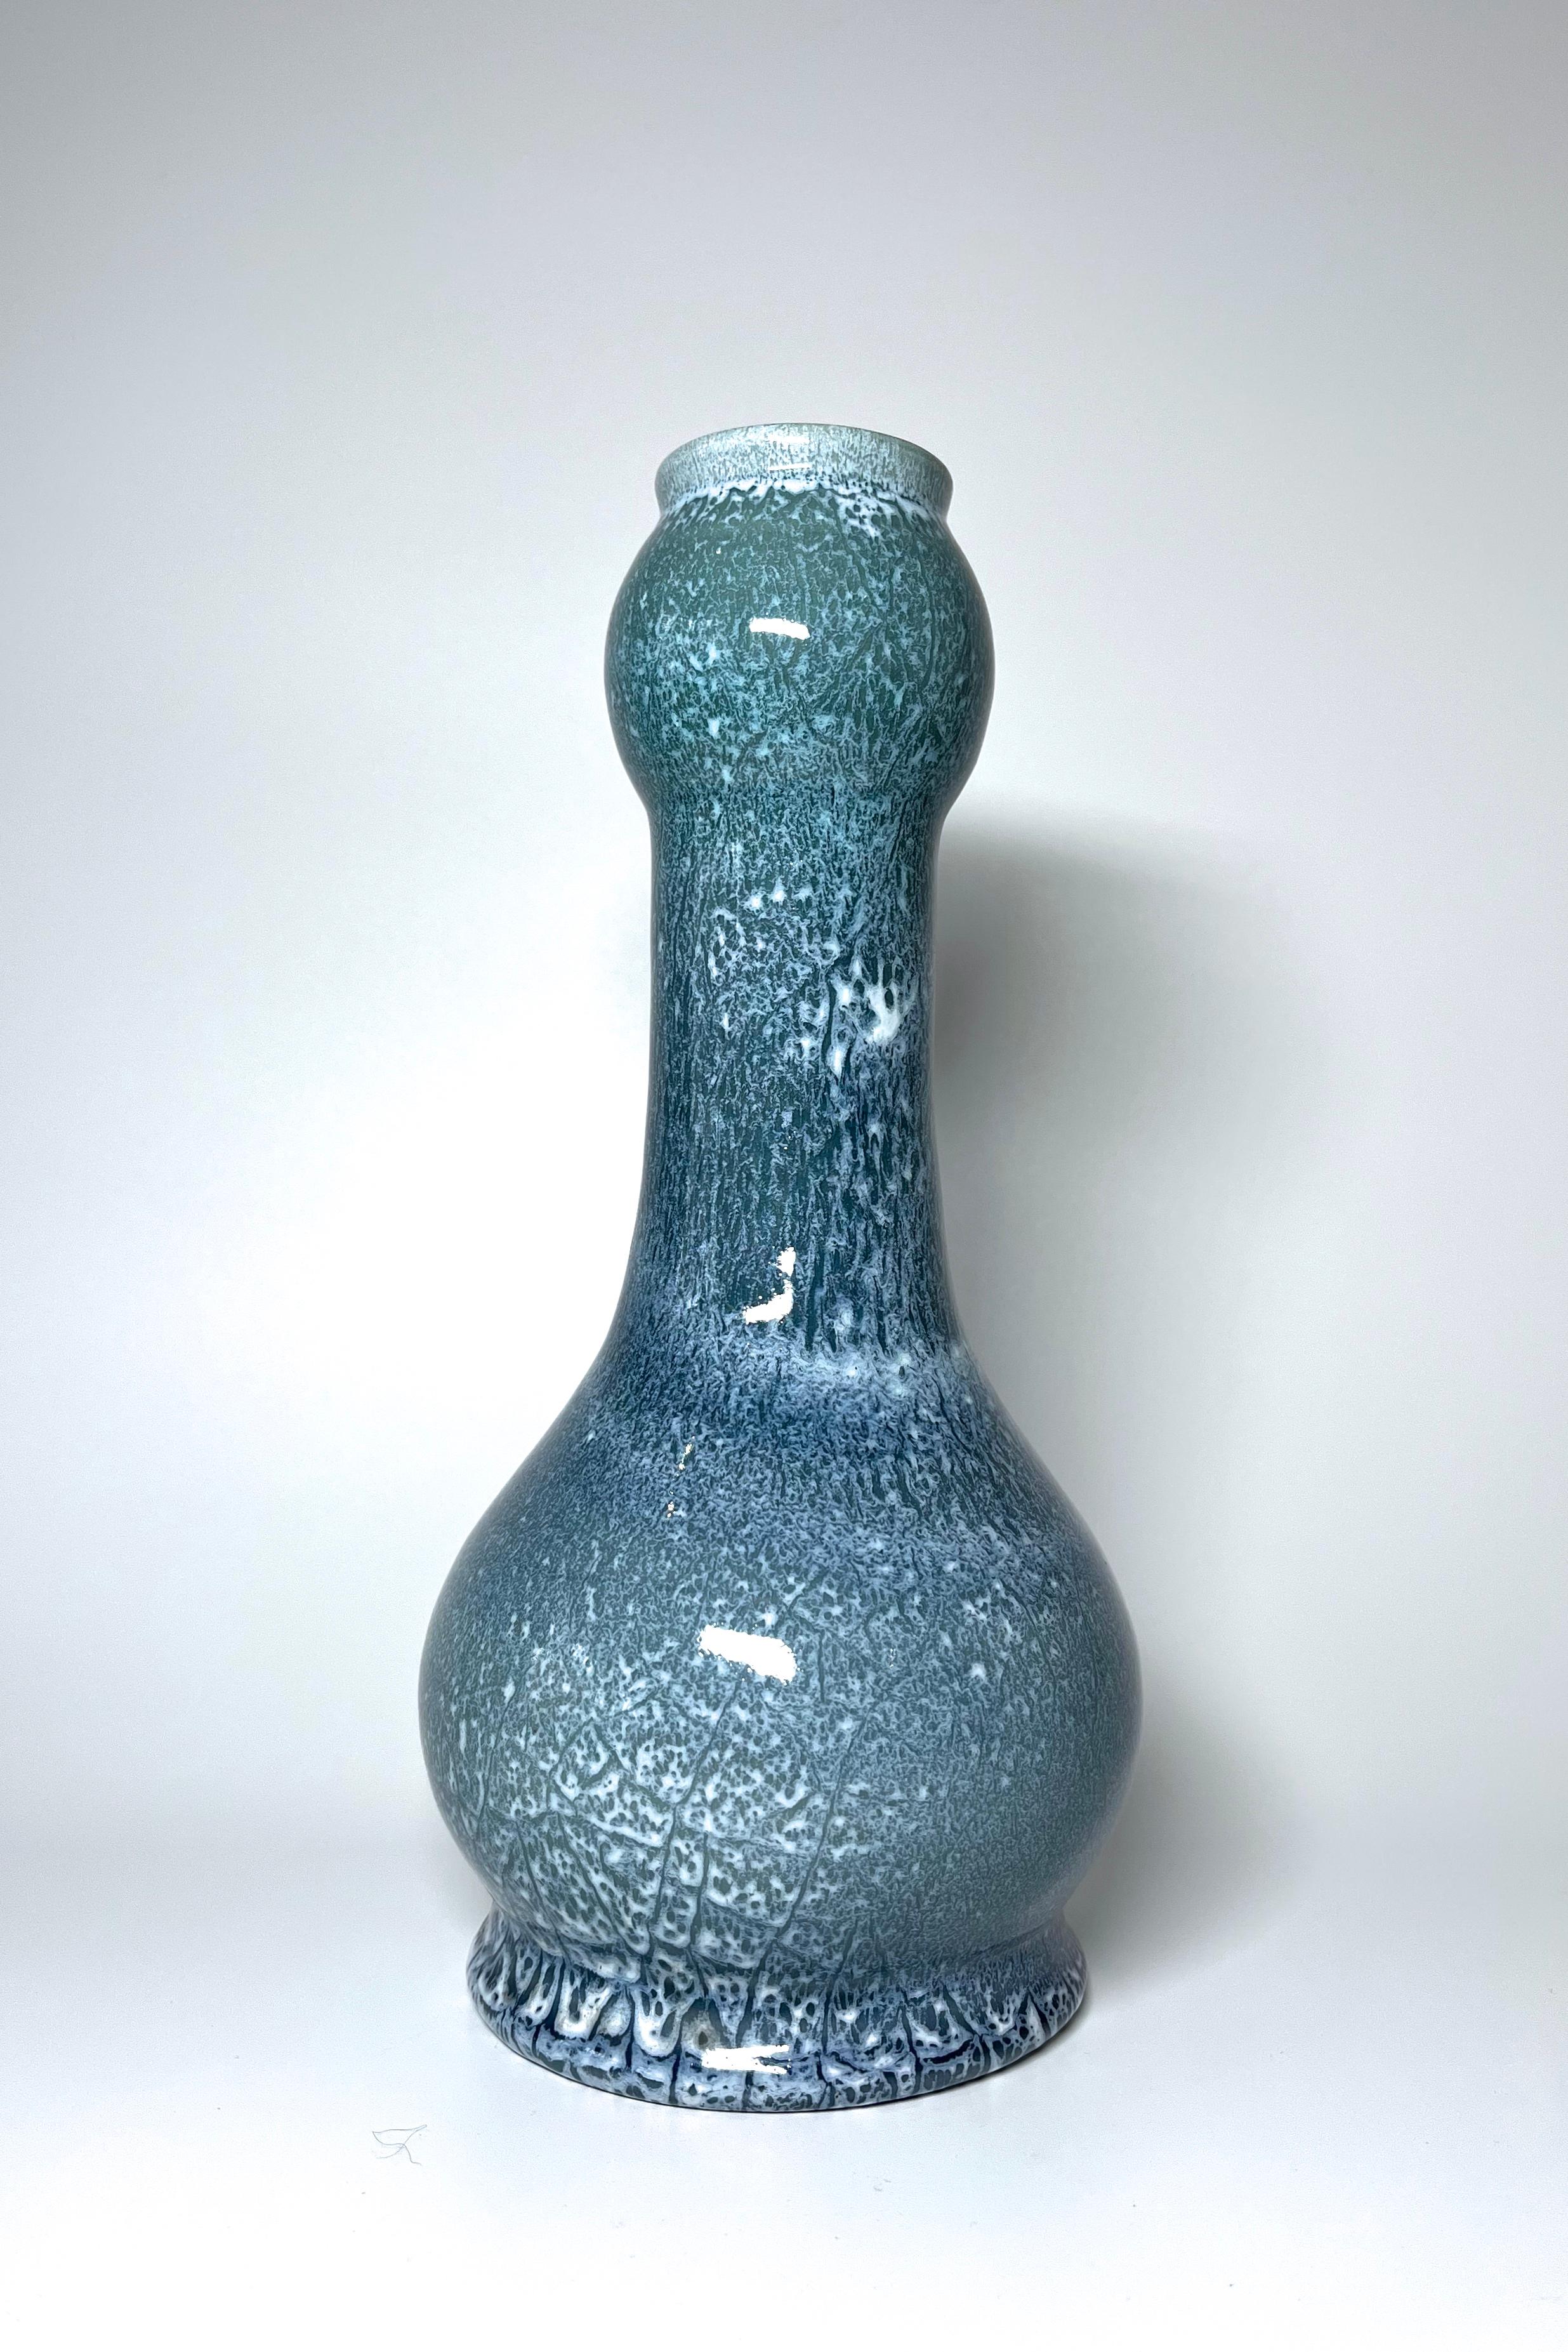 Shades of pale blue, grey and white, all combine and provide a fascinating crackle glaze to this superbly crafted piece
Out of the common shaped tall ceramic vase from Accolay, France
Circa 1960's
Signed Accolay JK to base
Height 9.5 inch, Diameter